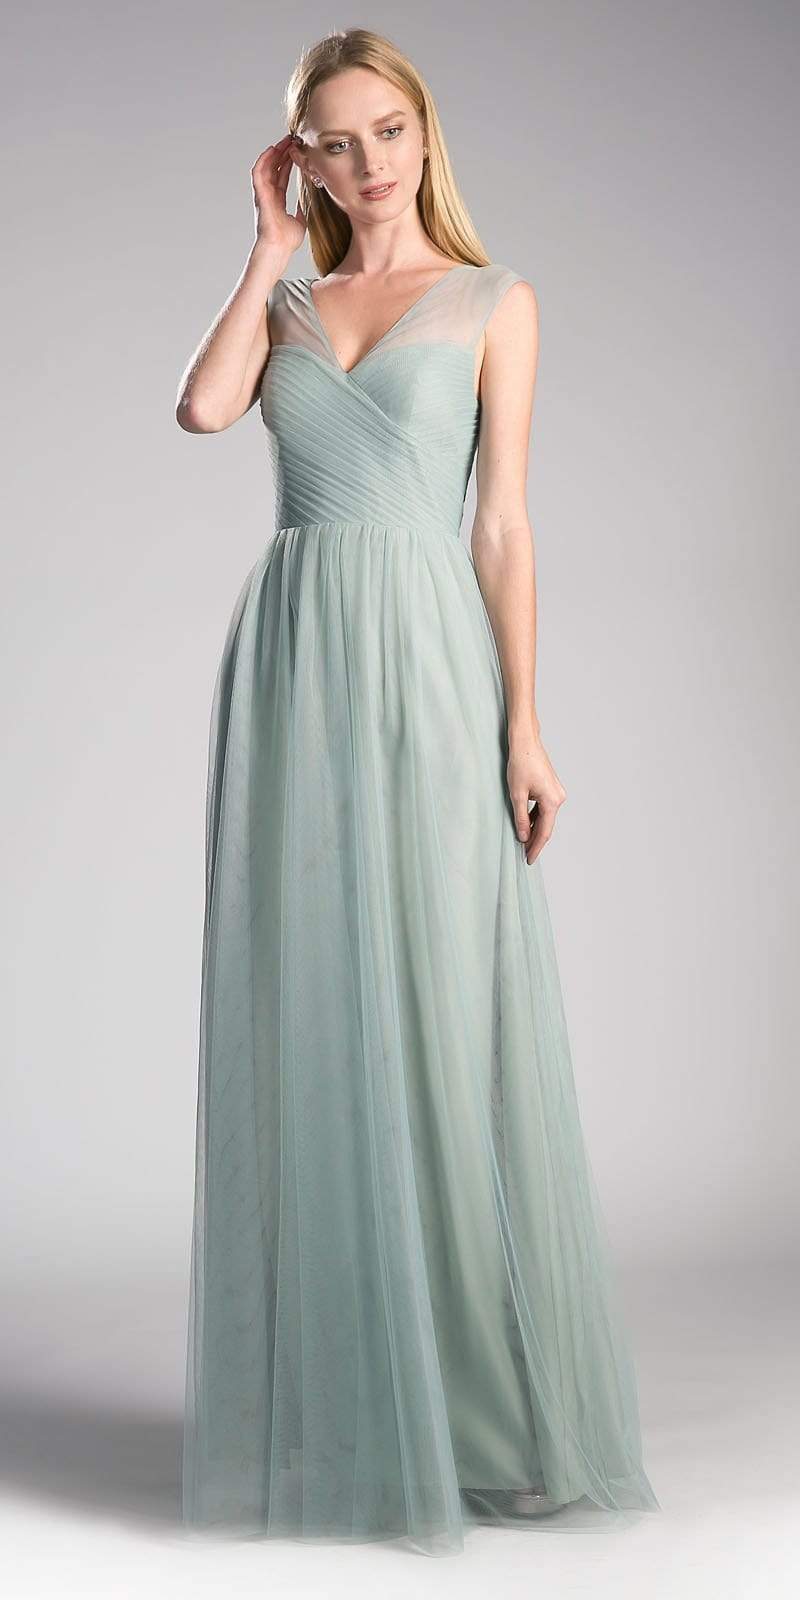 Cinderella Divine - ET320 Sleeveless Pleated Top A-Line Gown
